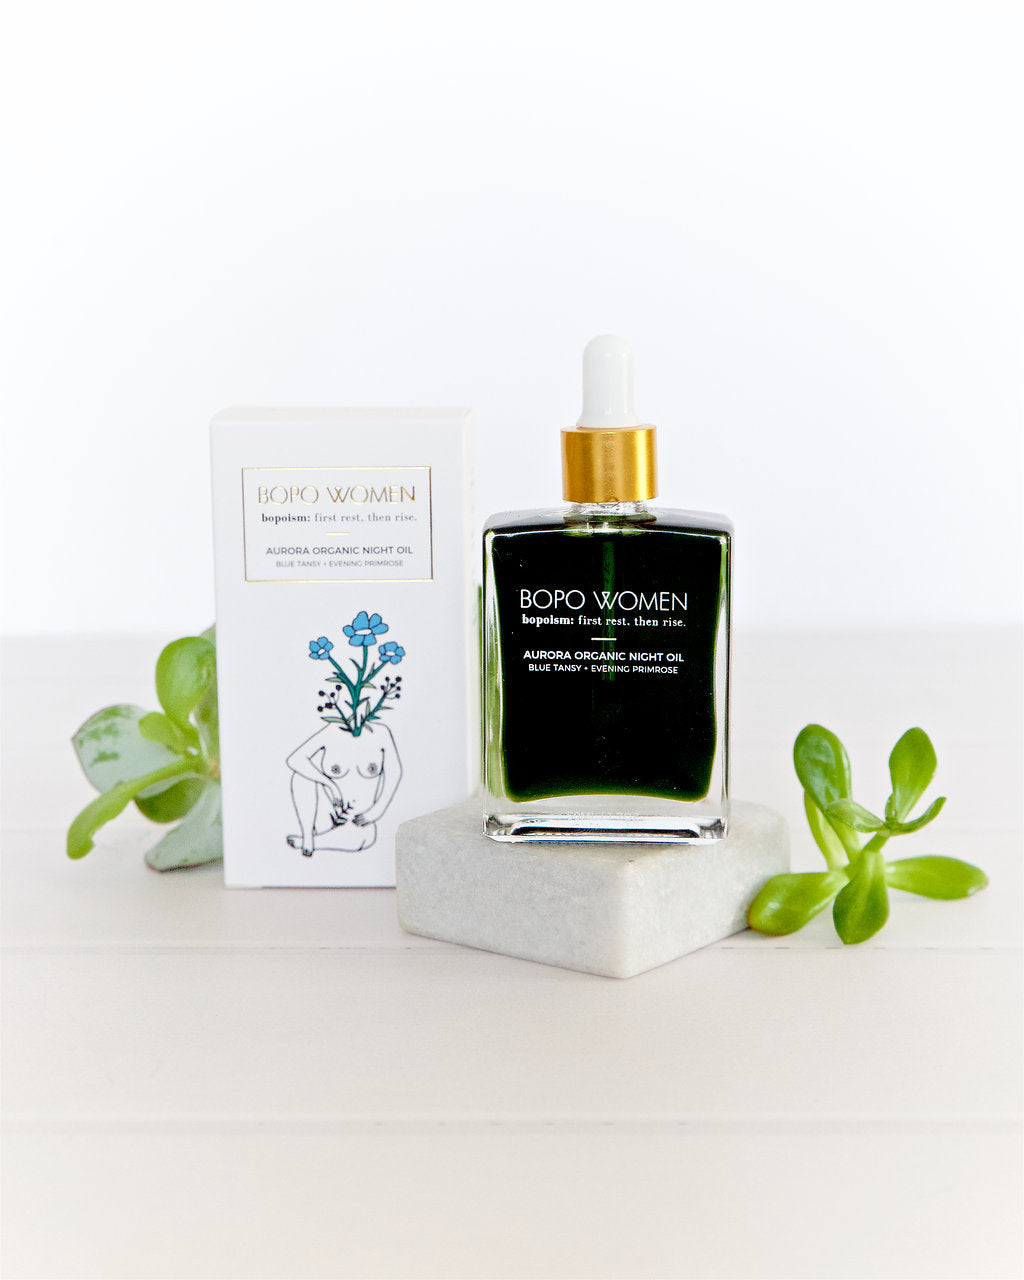 Aurorra organic night oil by bopo skincare is a deeply hydrating essential oil infused